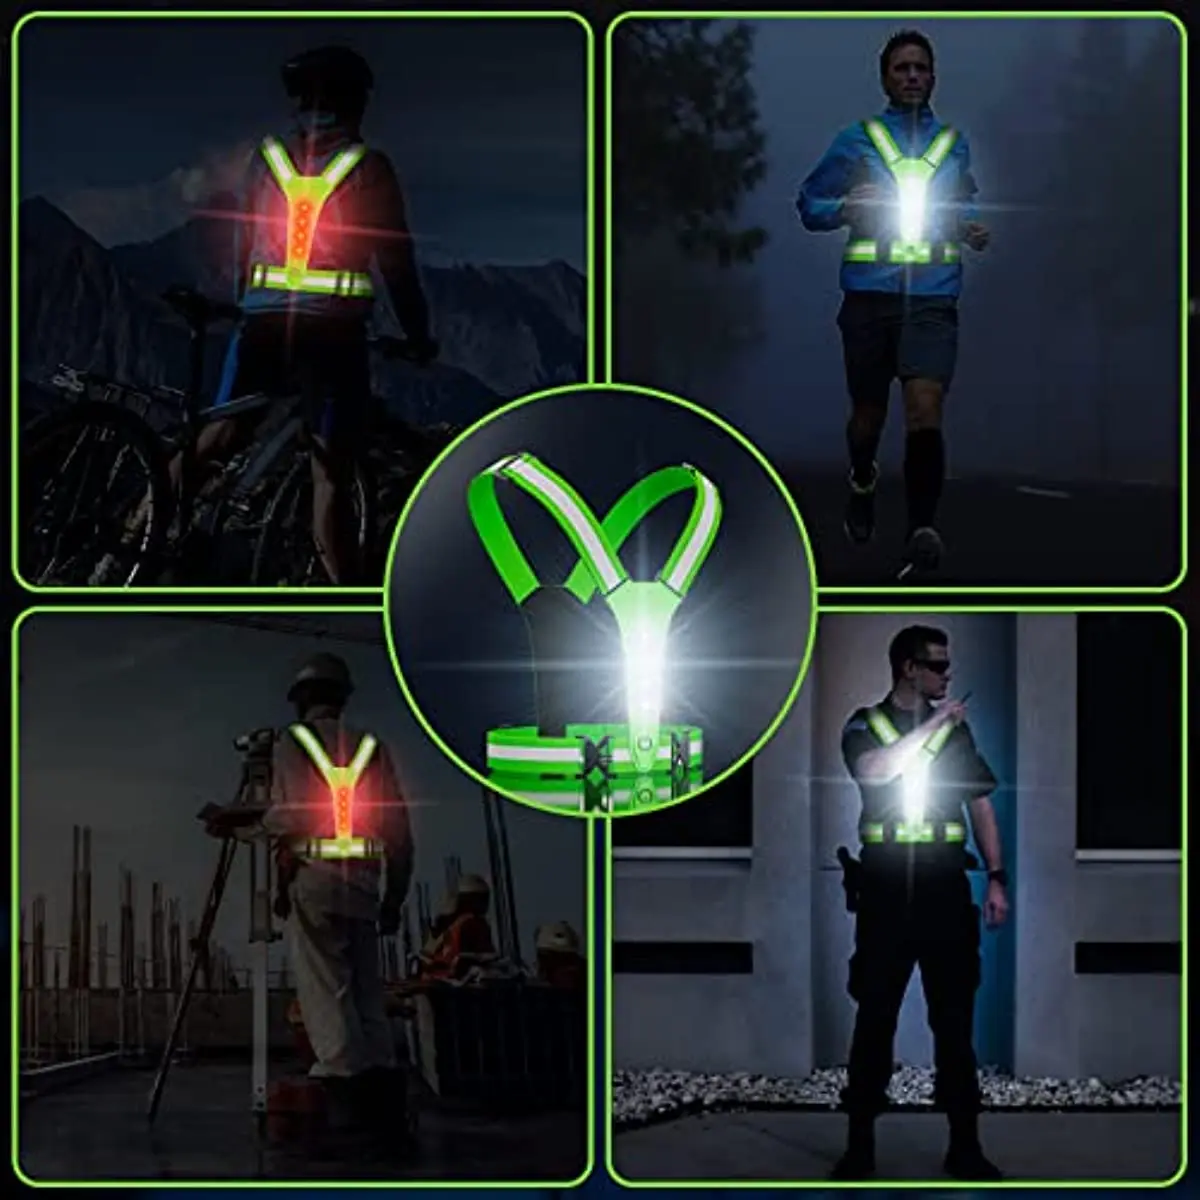 ConKrian LED Reflective Vest USB Rechargeable Running Gear Night Light up Vest Safety Gear Adjustable Elastic Size Night Runnin enlarge